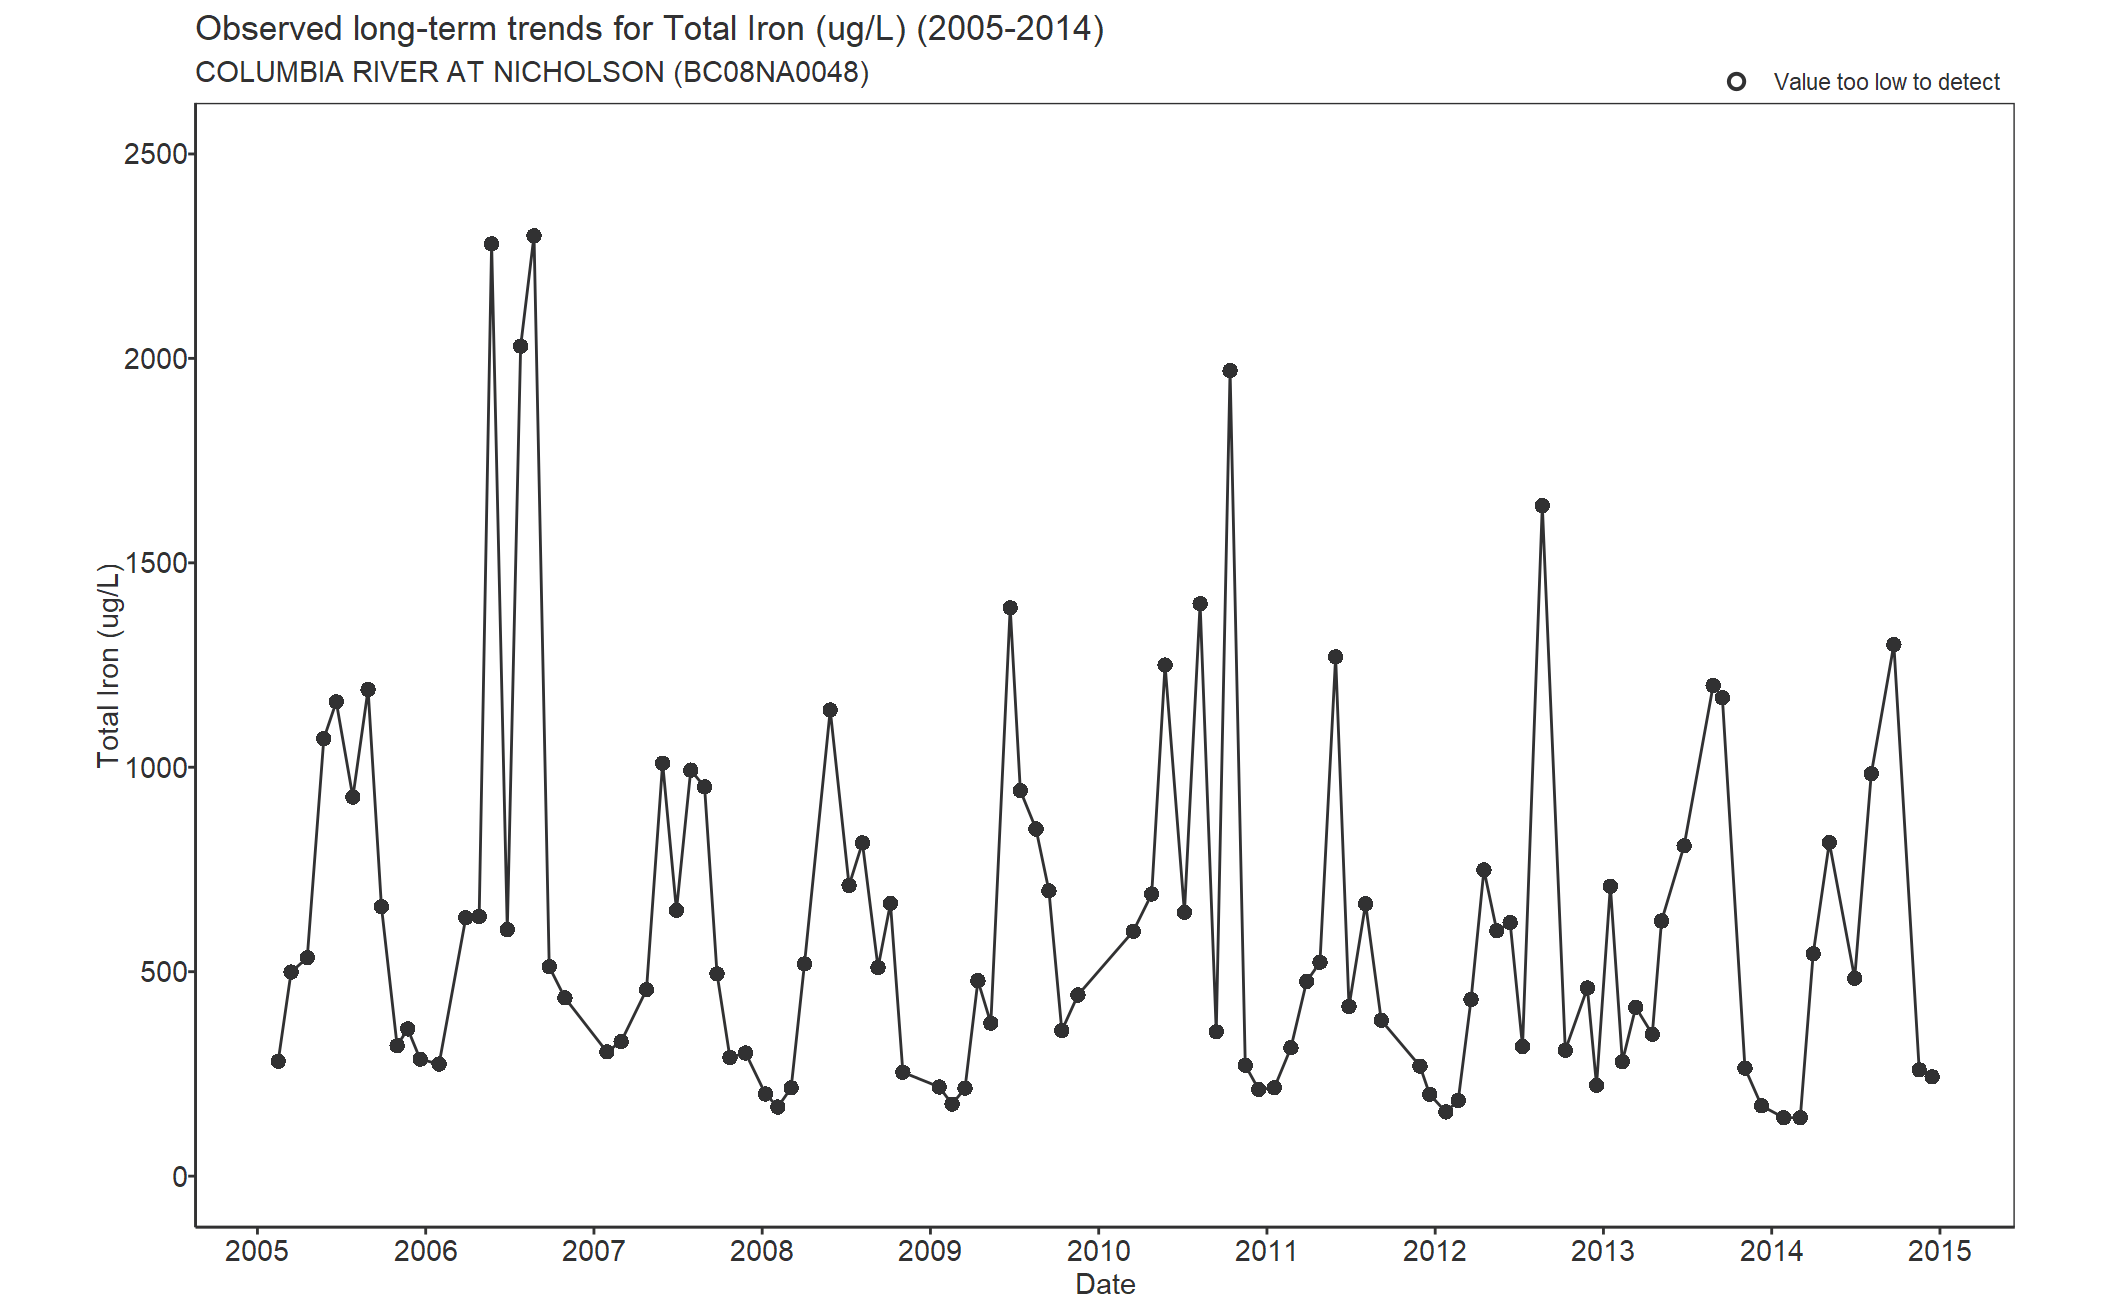 Observed long-term trends for Iron Total (2005-2014)